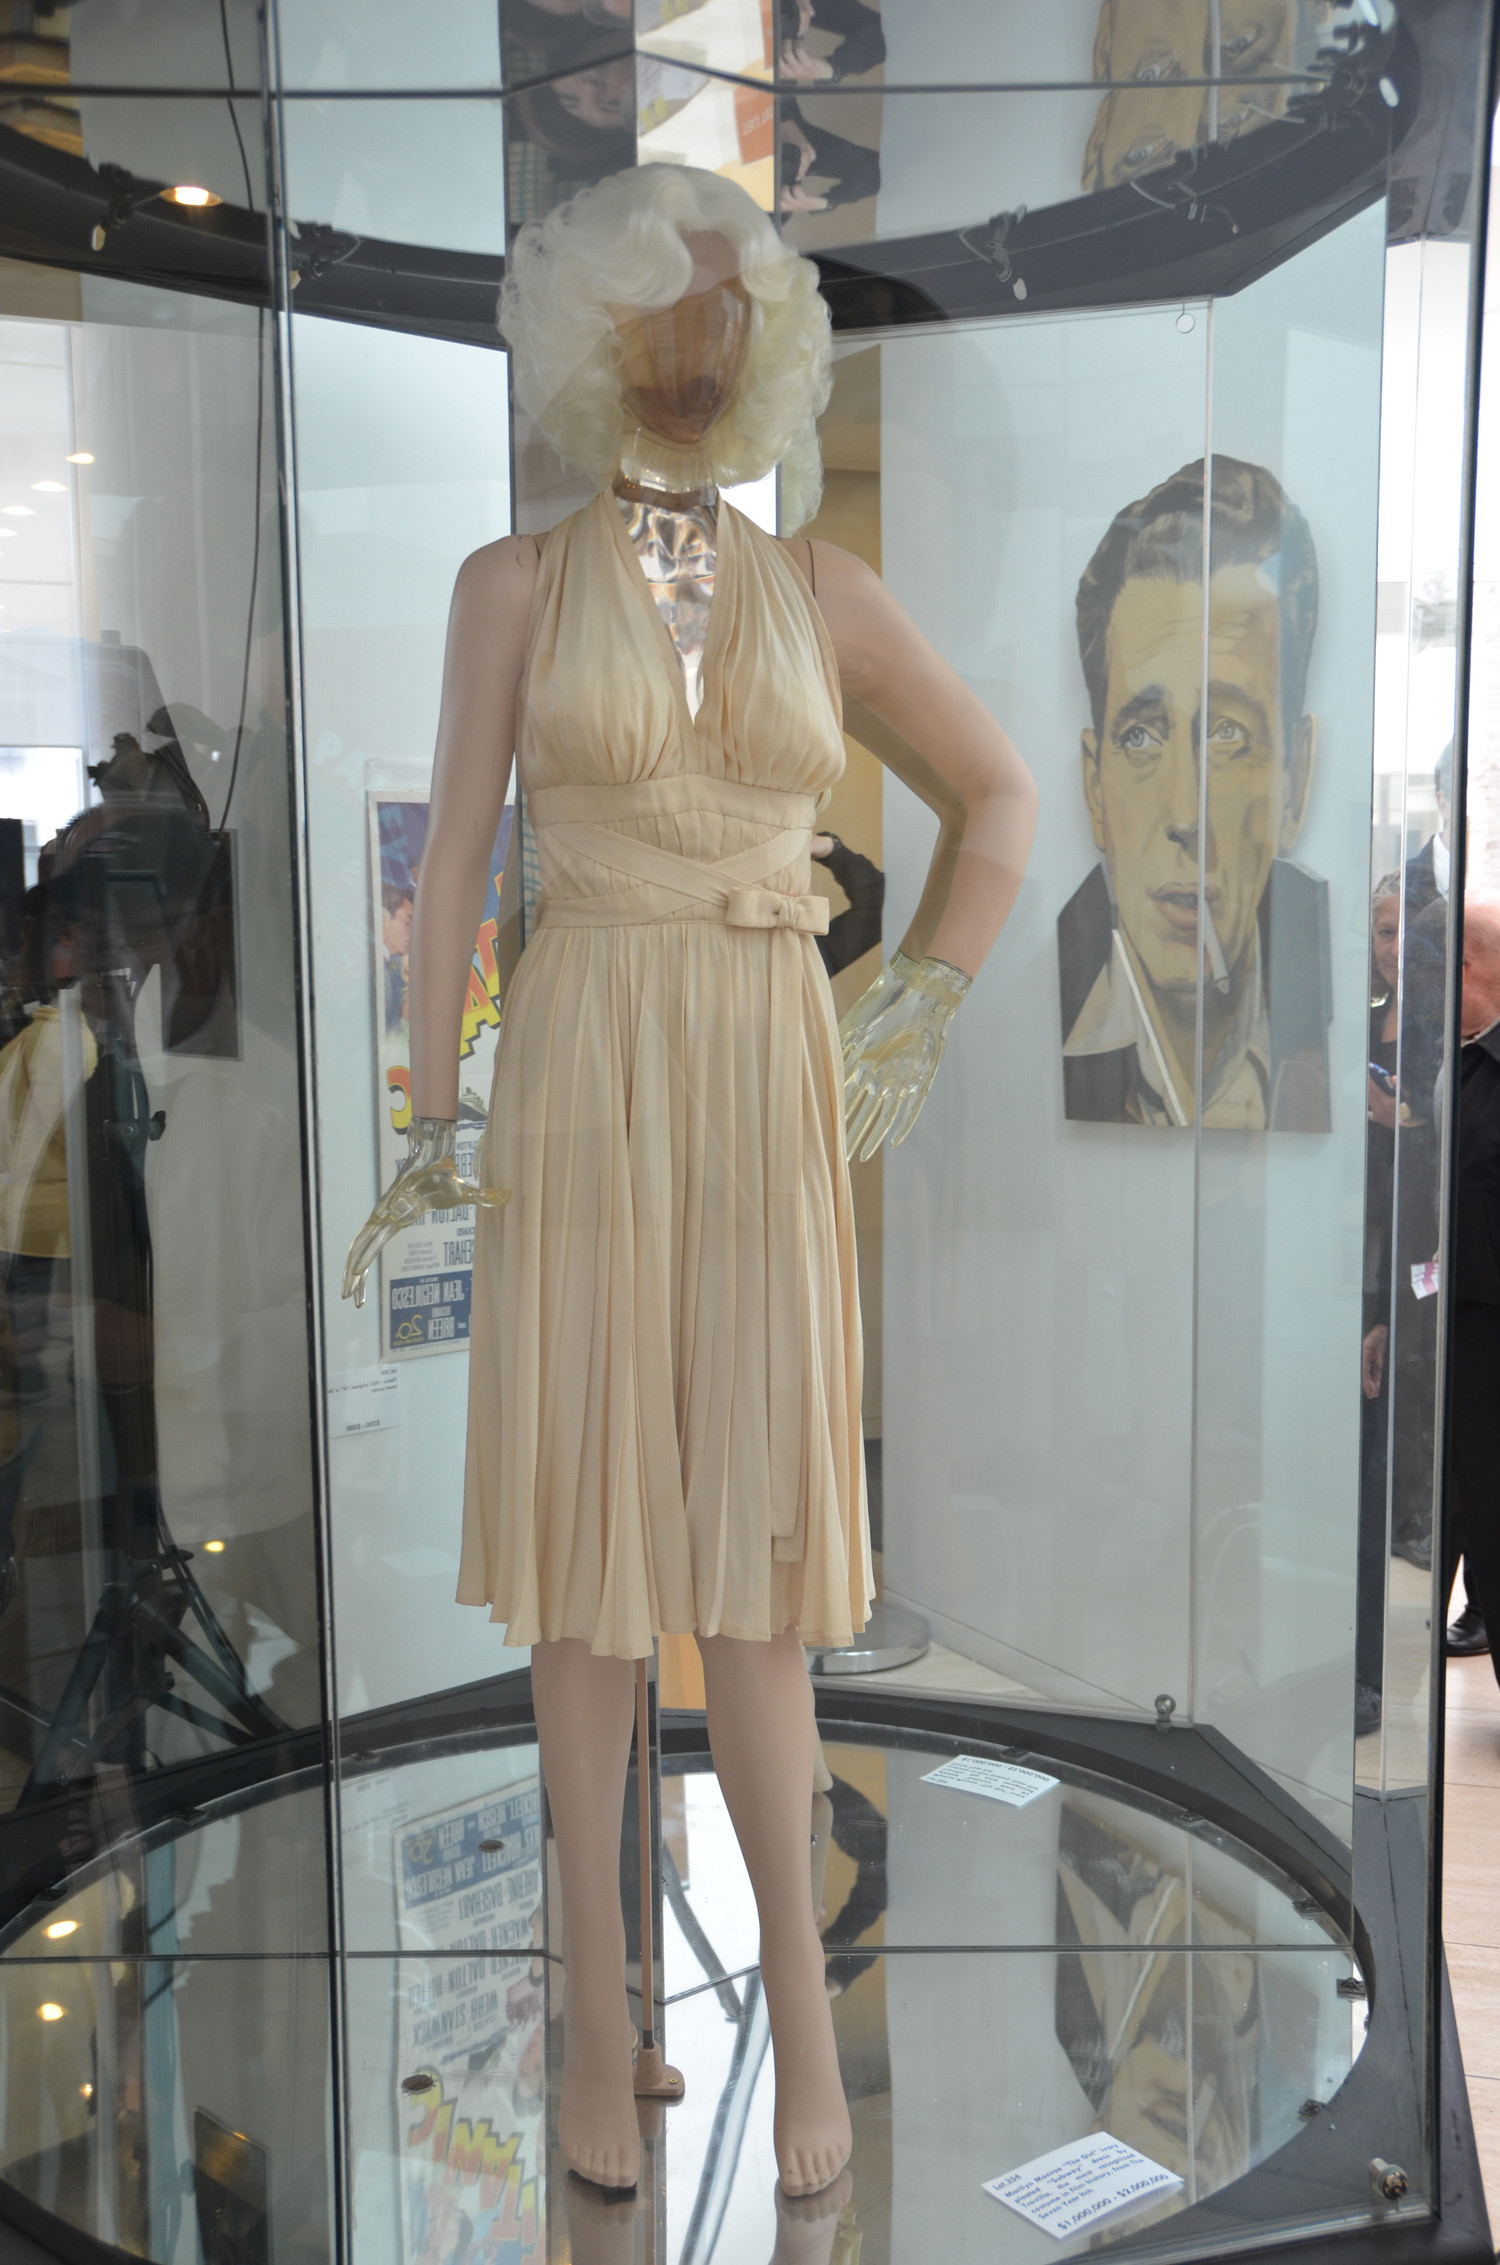 Marilyn Monroe's white dress from The 7 Year Itch on display at the Paley Center, Los Angeles